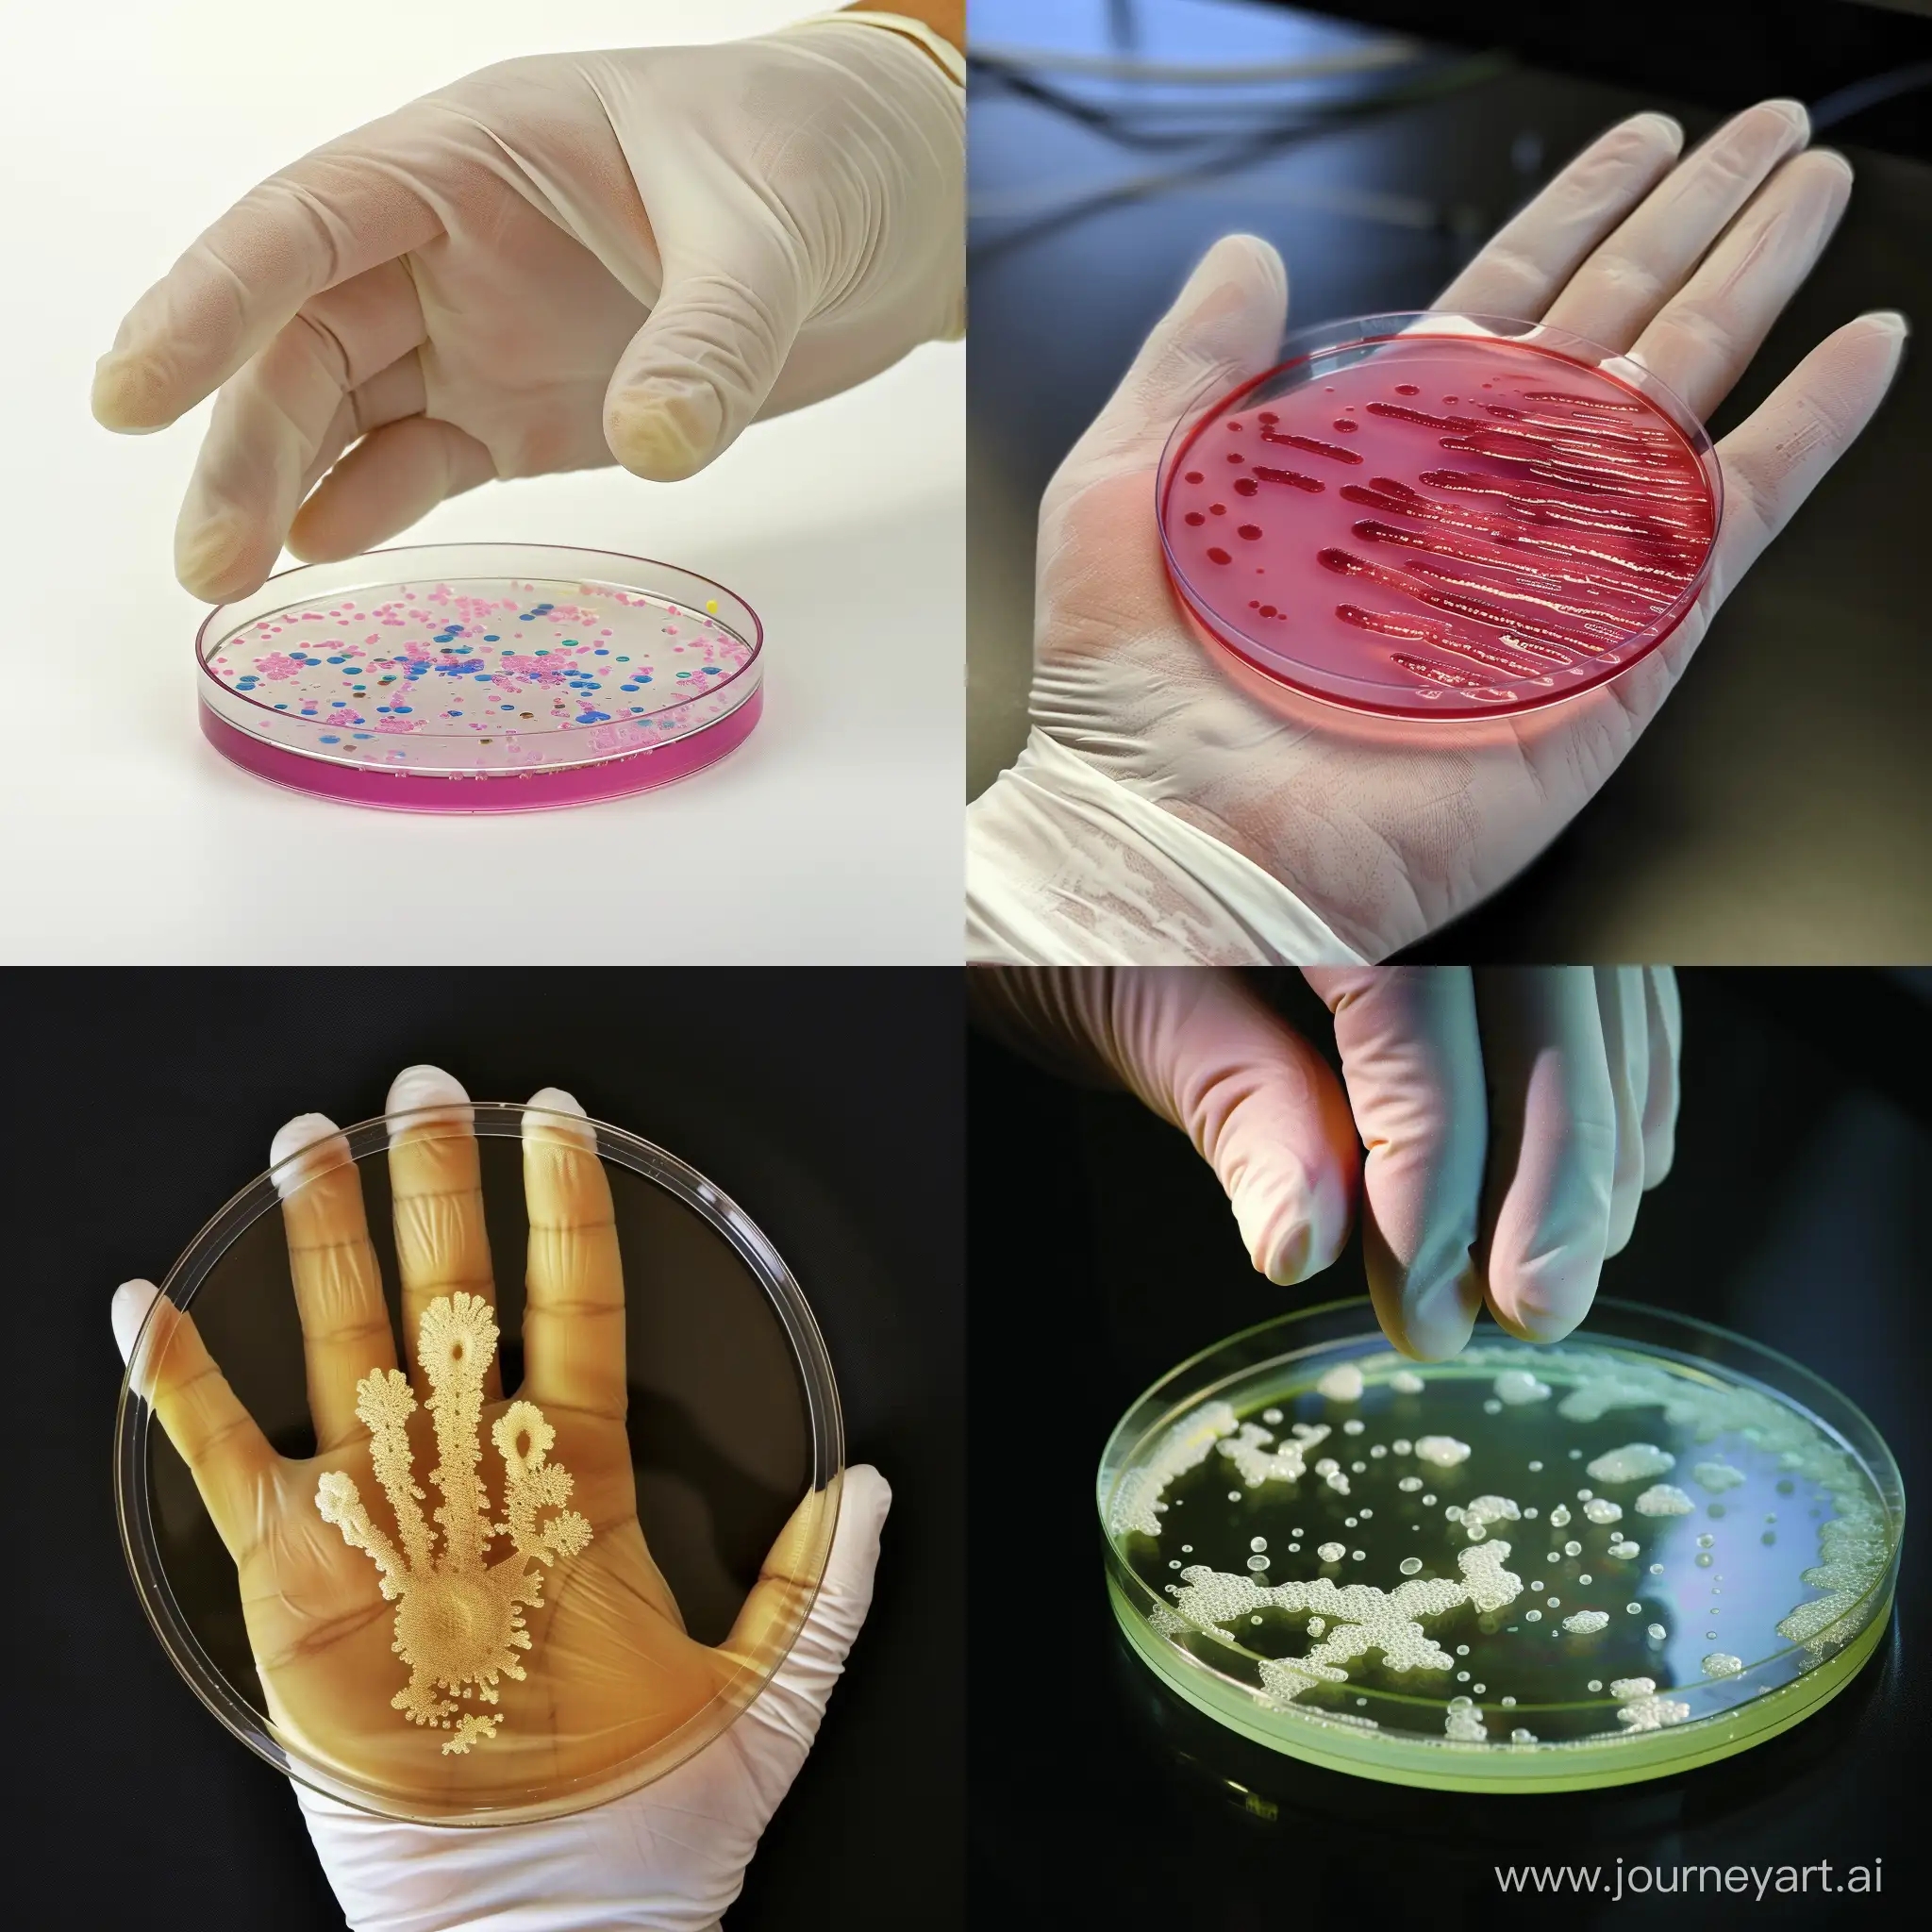 Clean-Hand-Culture-Results-on-Petri-Dish